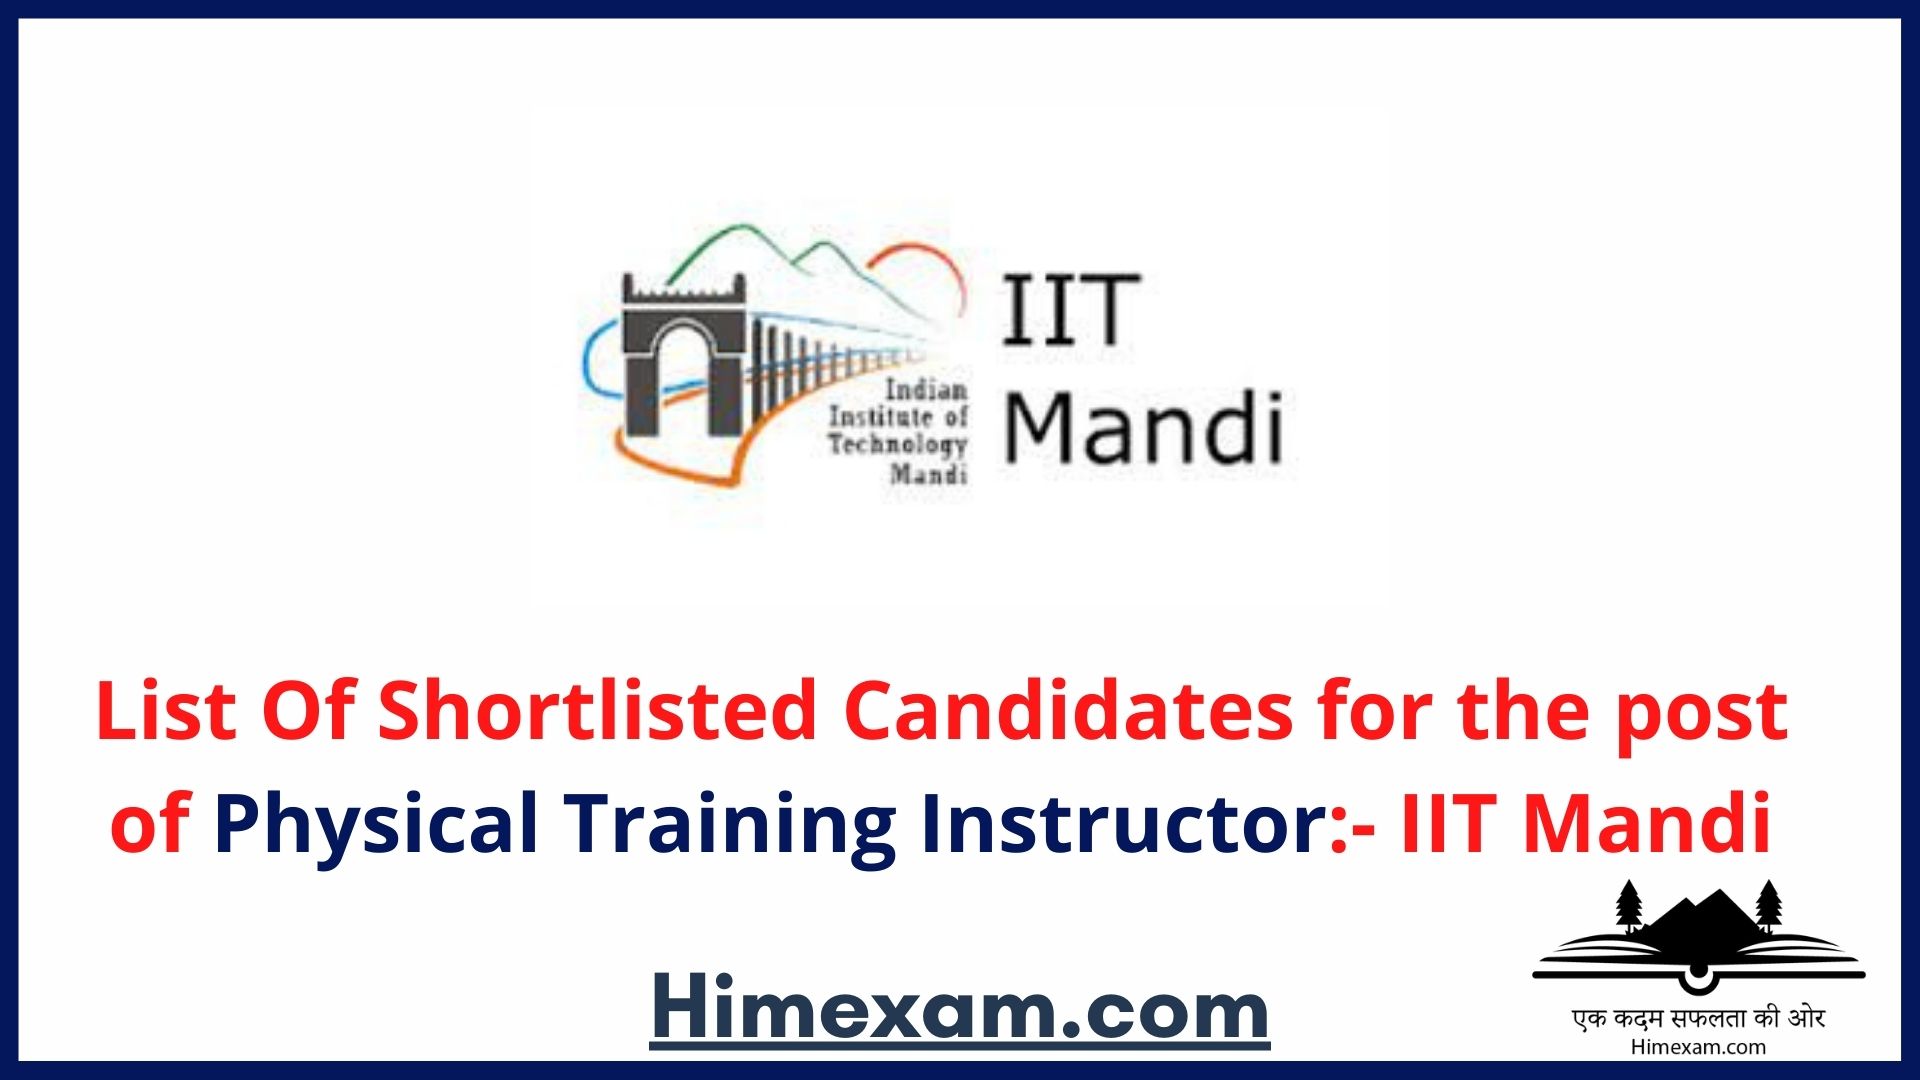 List Of Shortlisted Candidates for the post of Physical Training Instructor:- IIT Mandi